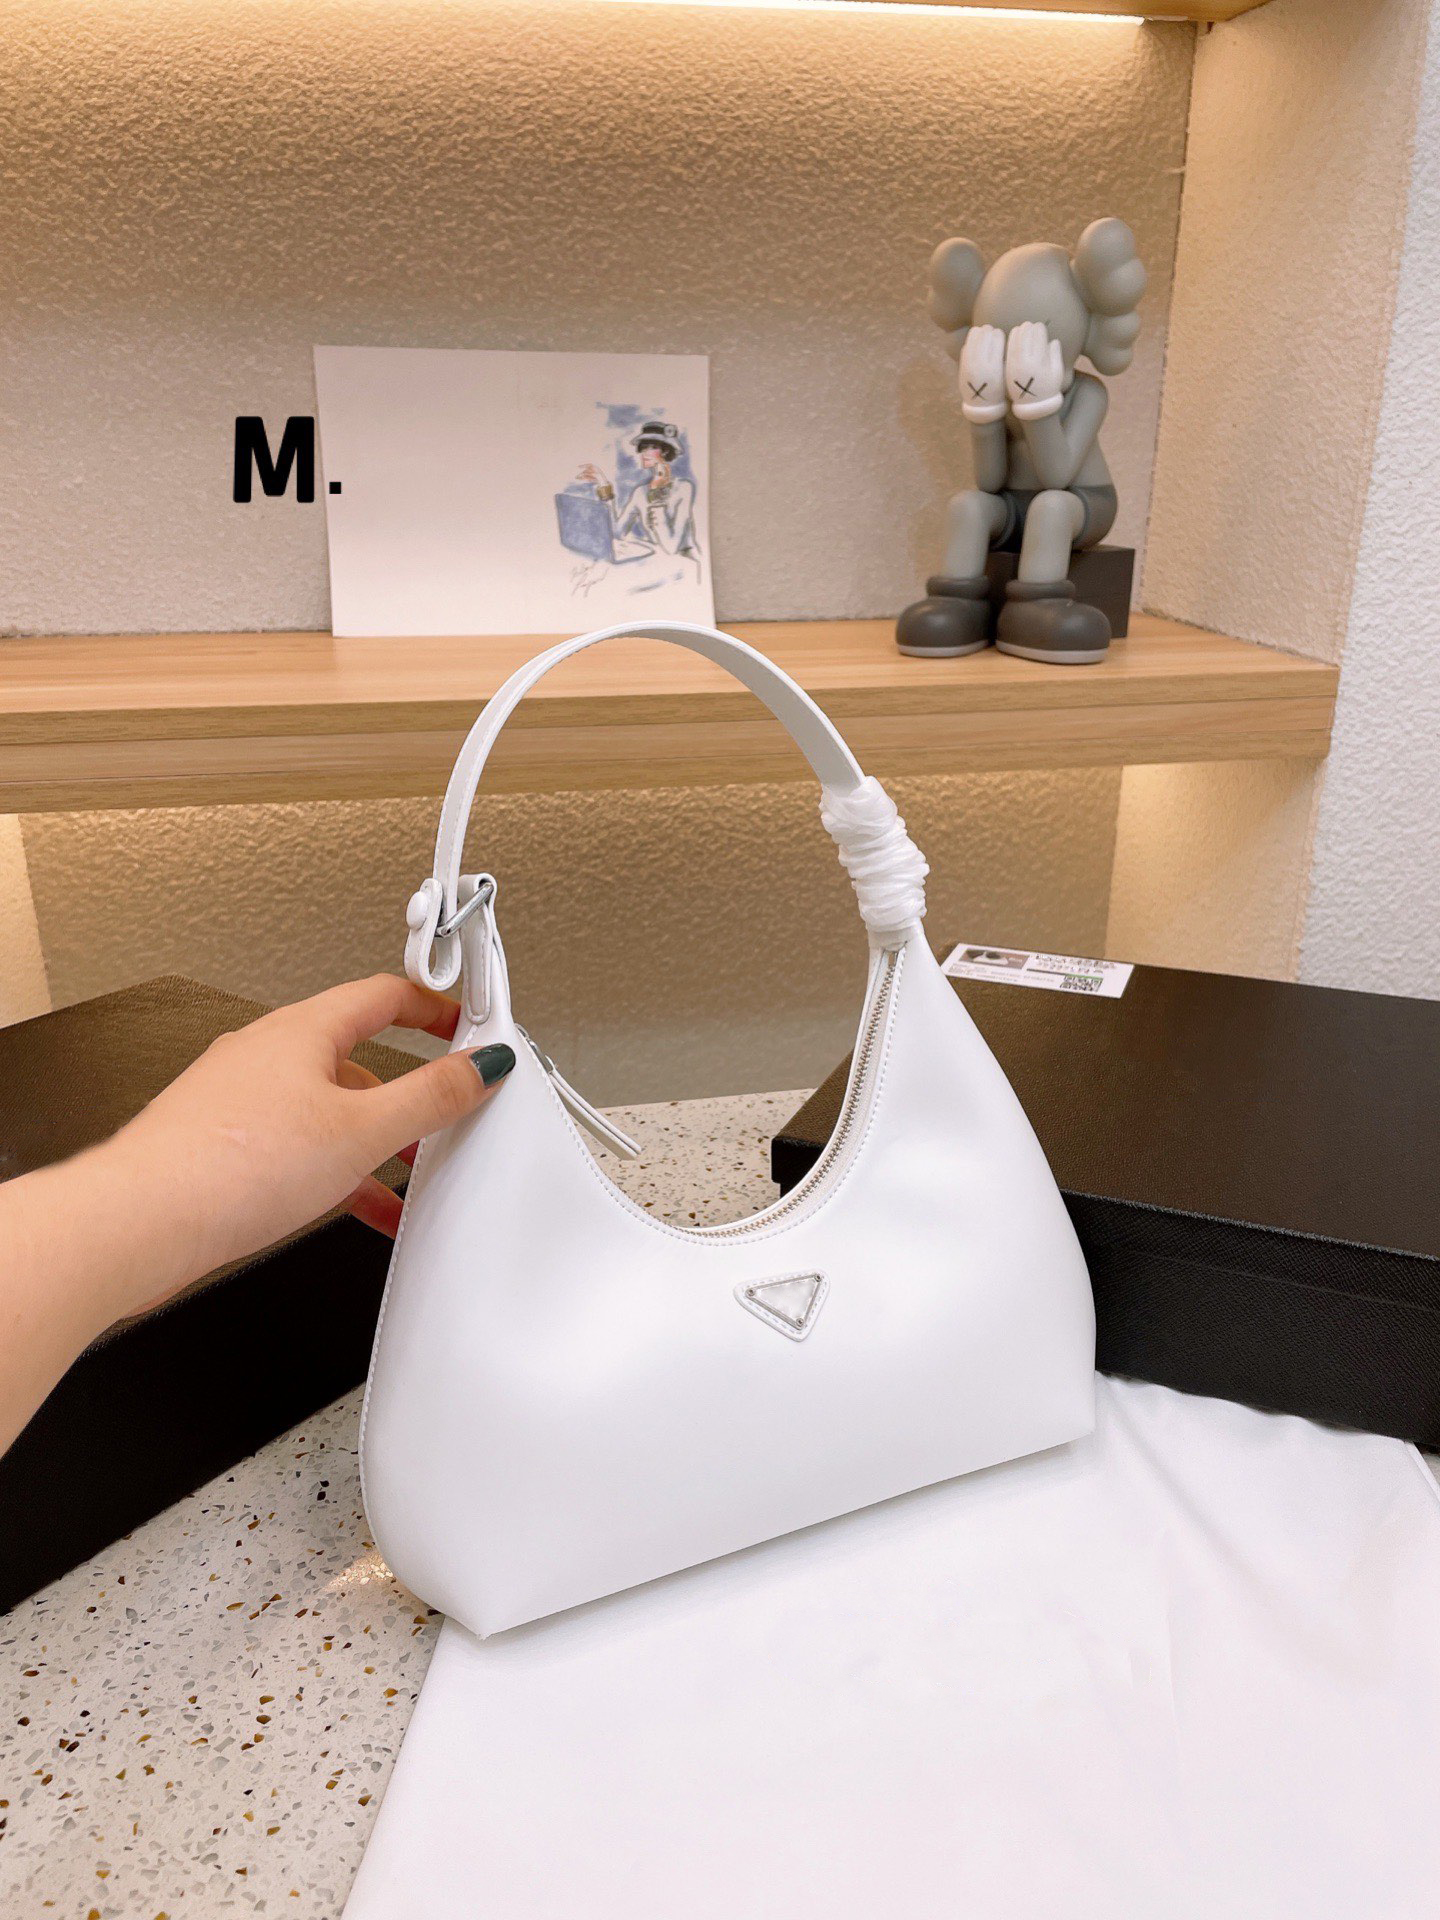 2022 5A Luxury Designer Bag Shoulder Bag Totes Top Women Crossbody The Classic Elegant Simple Exquisite Perfectly Shows Elegants Charm Girls Coin Purse With Box